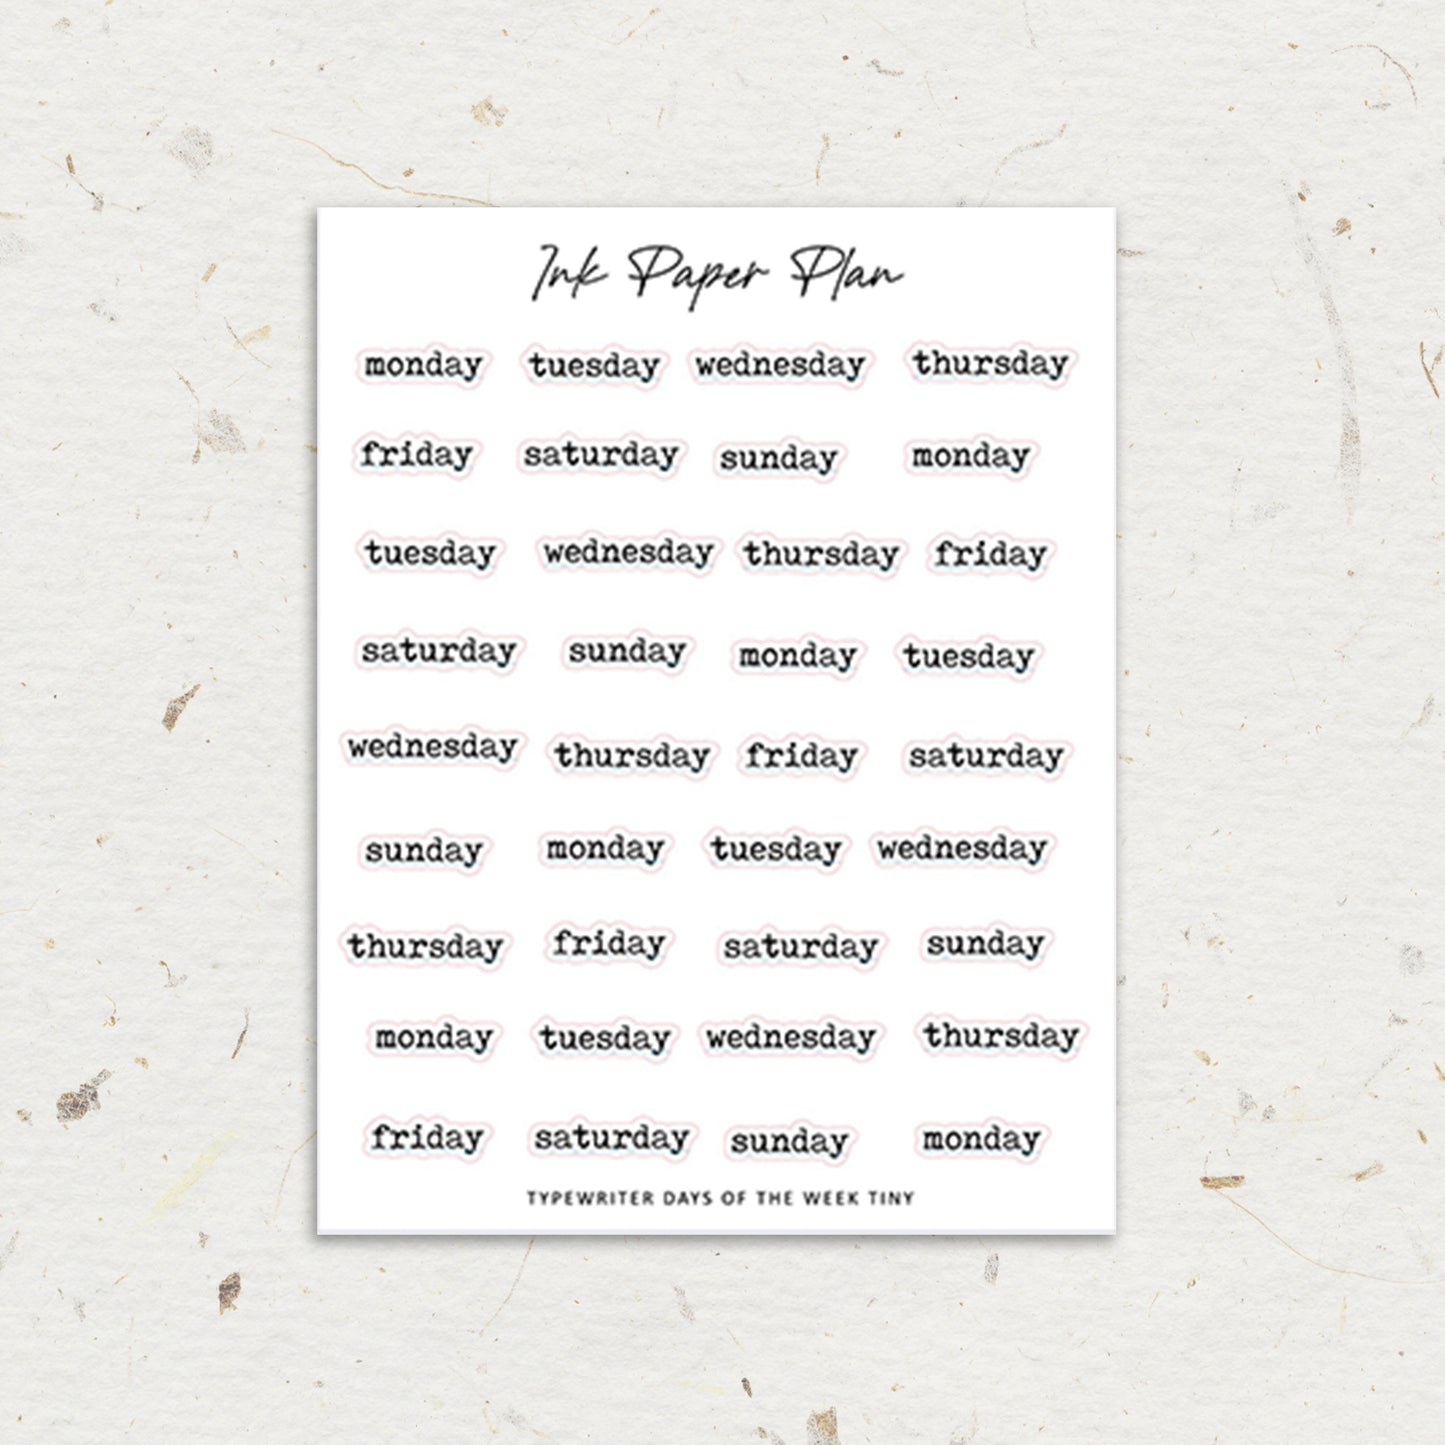 Tiny Short Typewritter Days of the week | Foiled Script